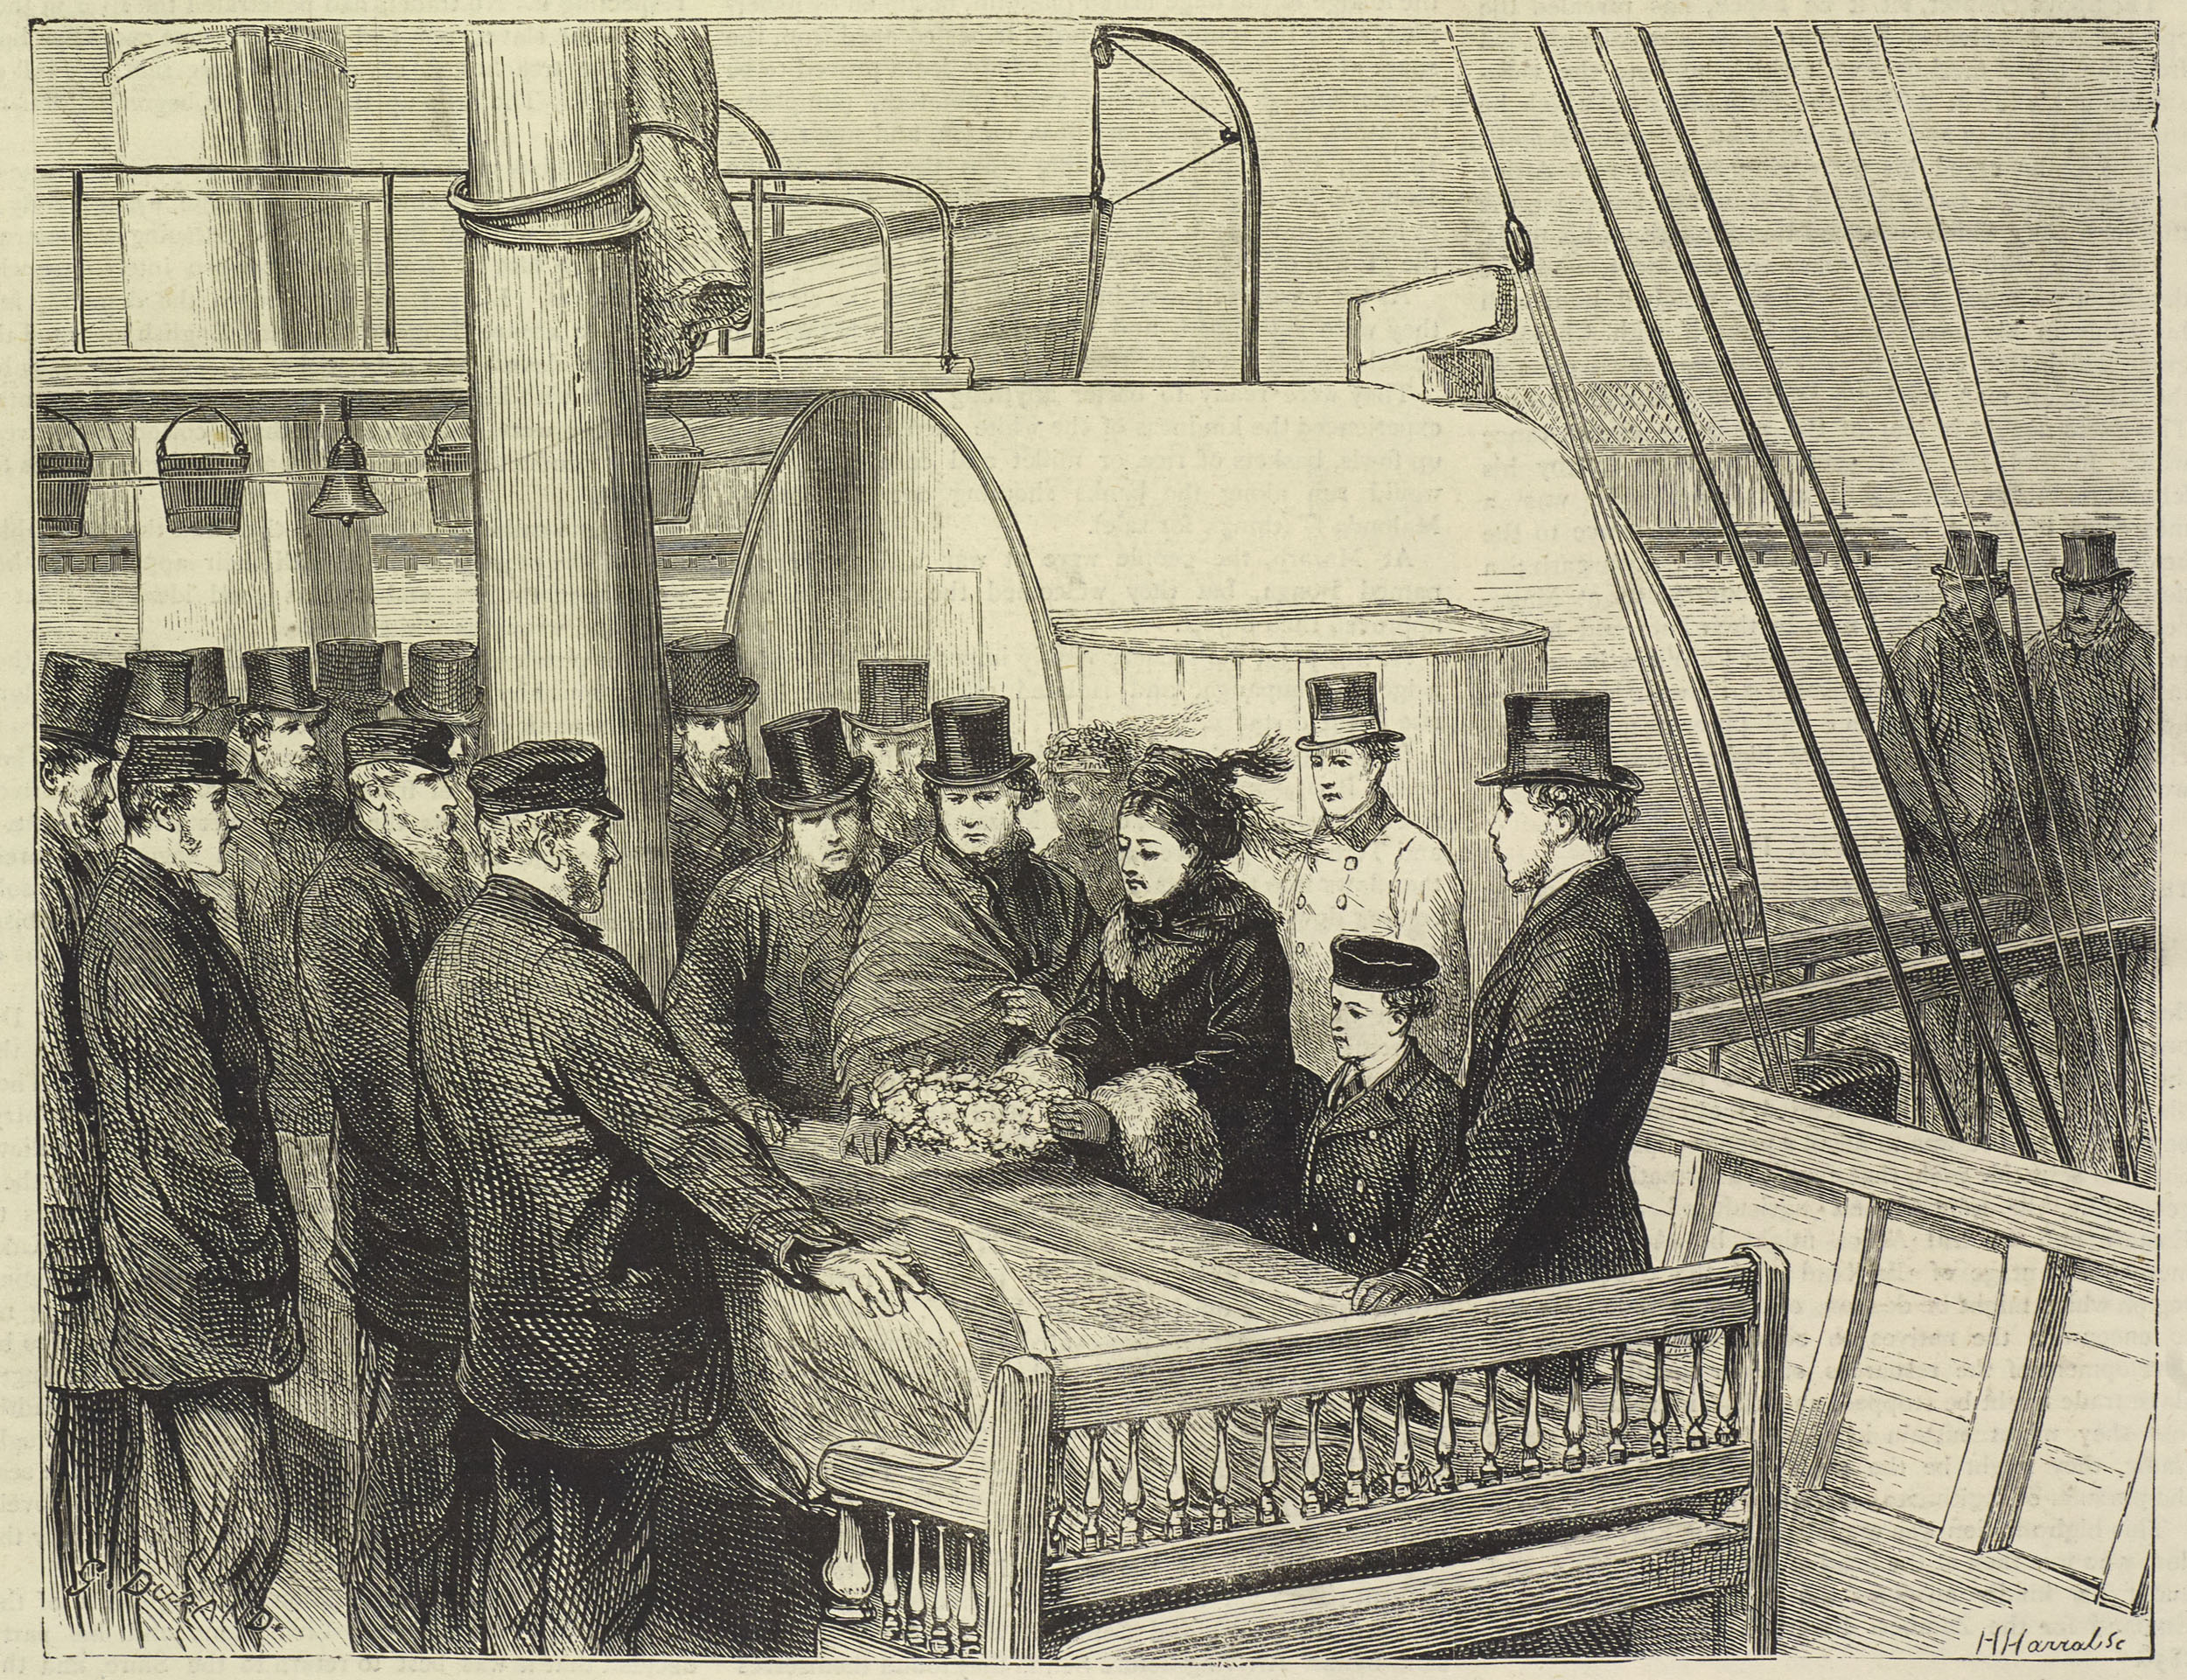 Depositing Wreaths on the Coffin on the Landing of the Body at Southampton. Illustration from 'The Life and Labours of David Livingstone' (Stanley 1874:401). Copyright National Library of Scotland. Creative Commons Share-alike 2.5 UK: Scotland (https://creativecommons.org/licenses/by-nc-sa/2.5/scotland/).